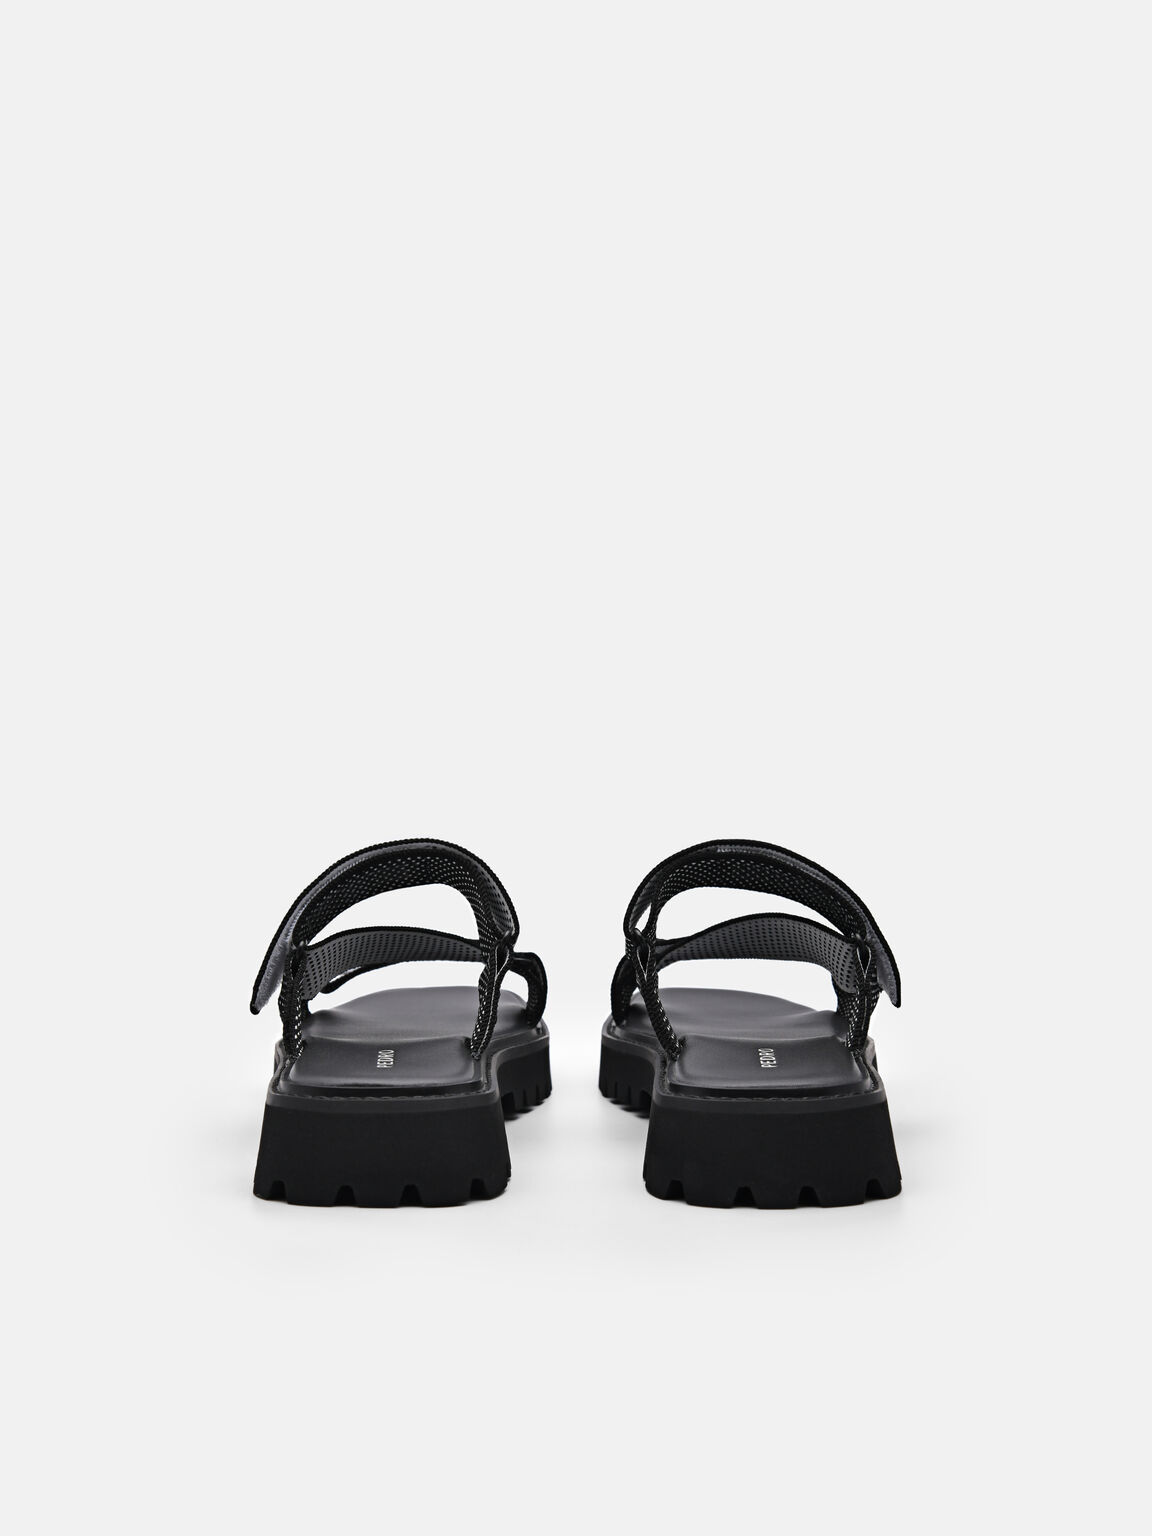 Ronni Knitted Sandals, Black